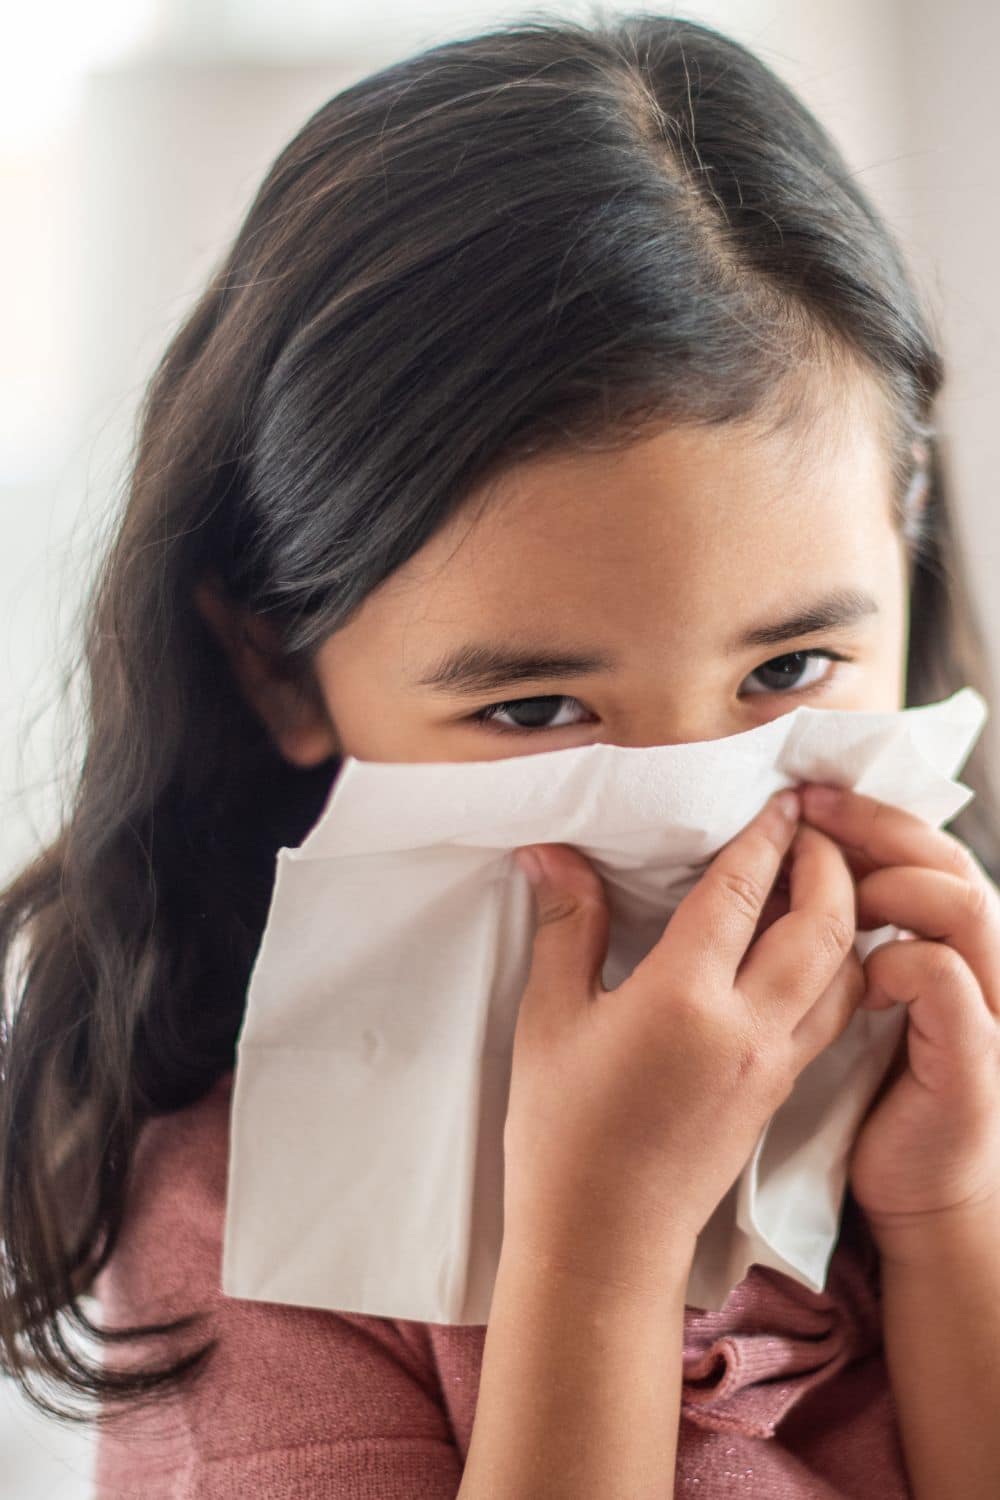 Seasonal Allergies In Children: What Parents Should Know